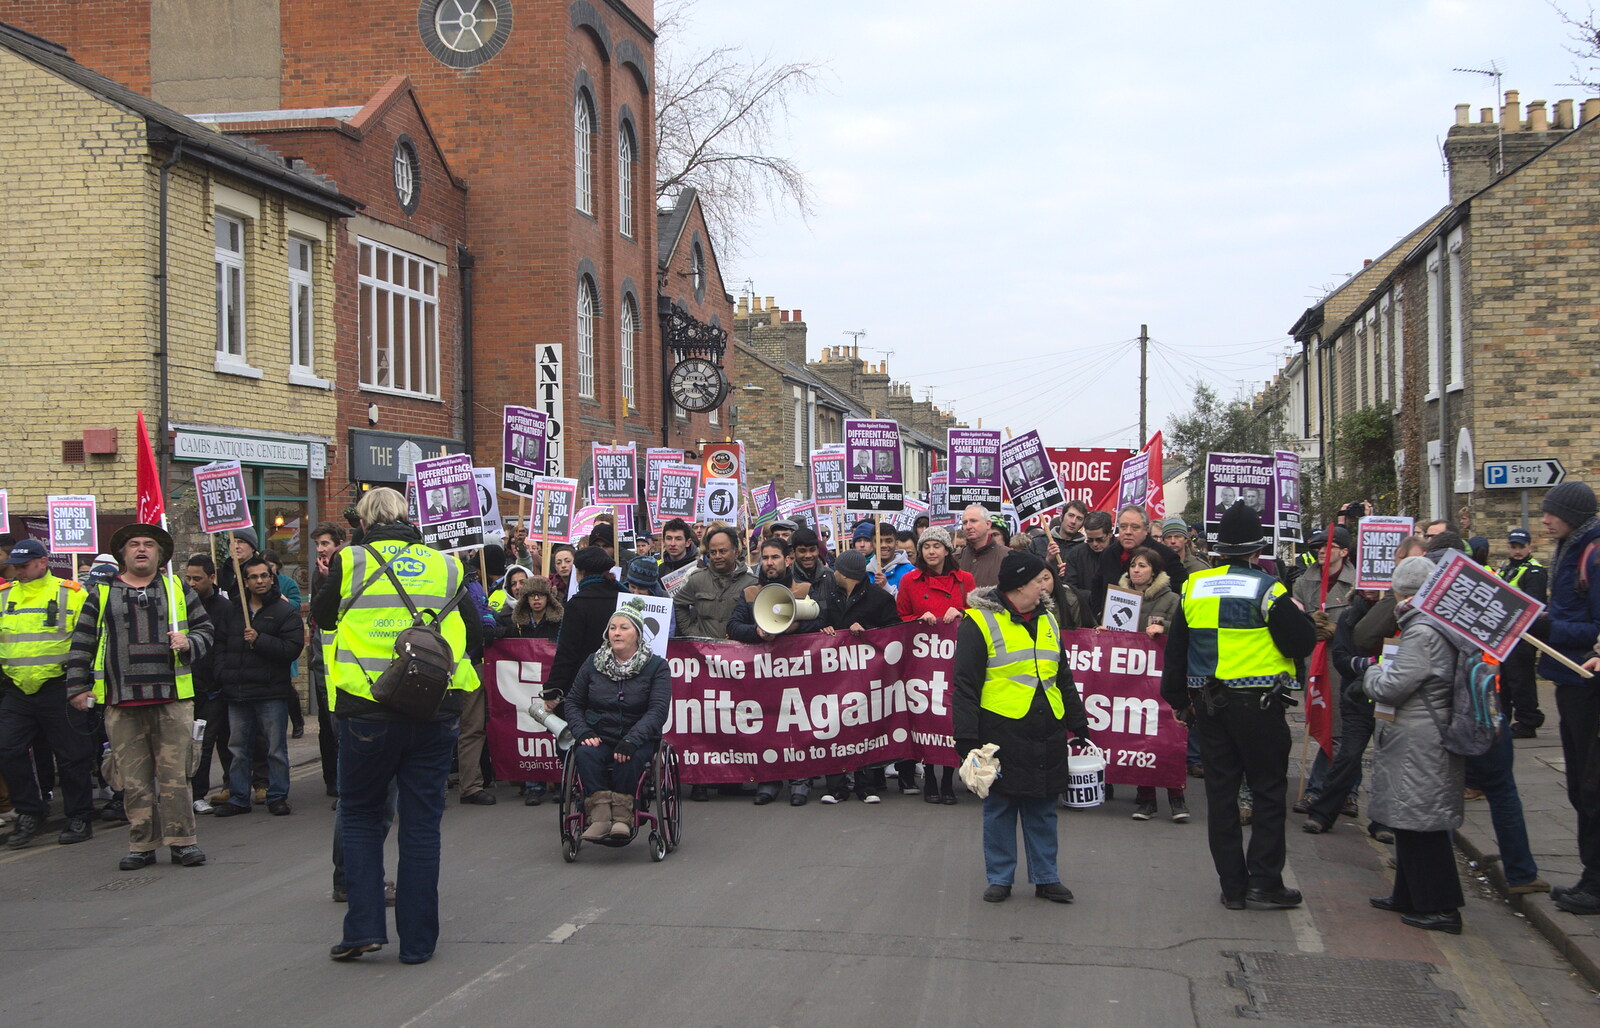 The massed marchers are stopped on Gwydir Street from An Anti-Fascist March, Mill Road, Cambridge - 23rd February 2013